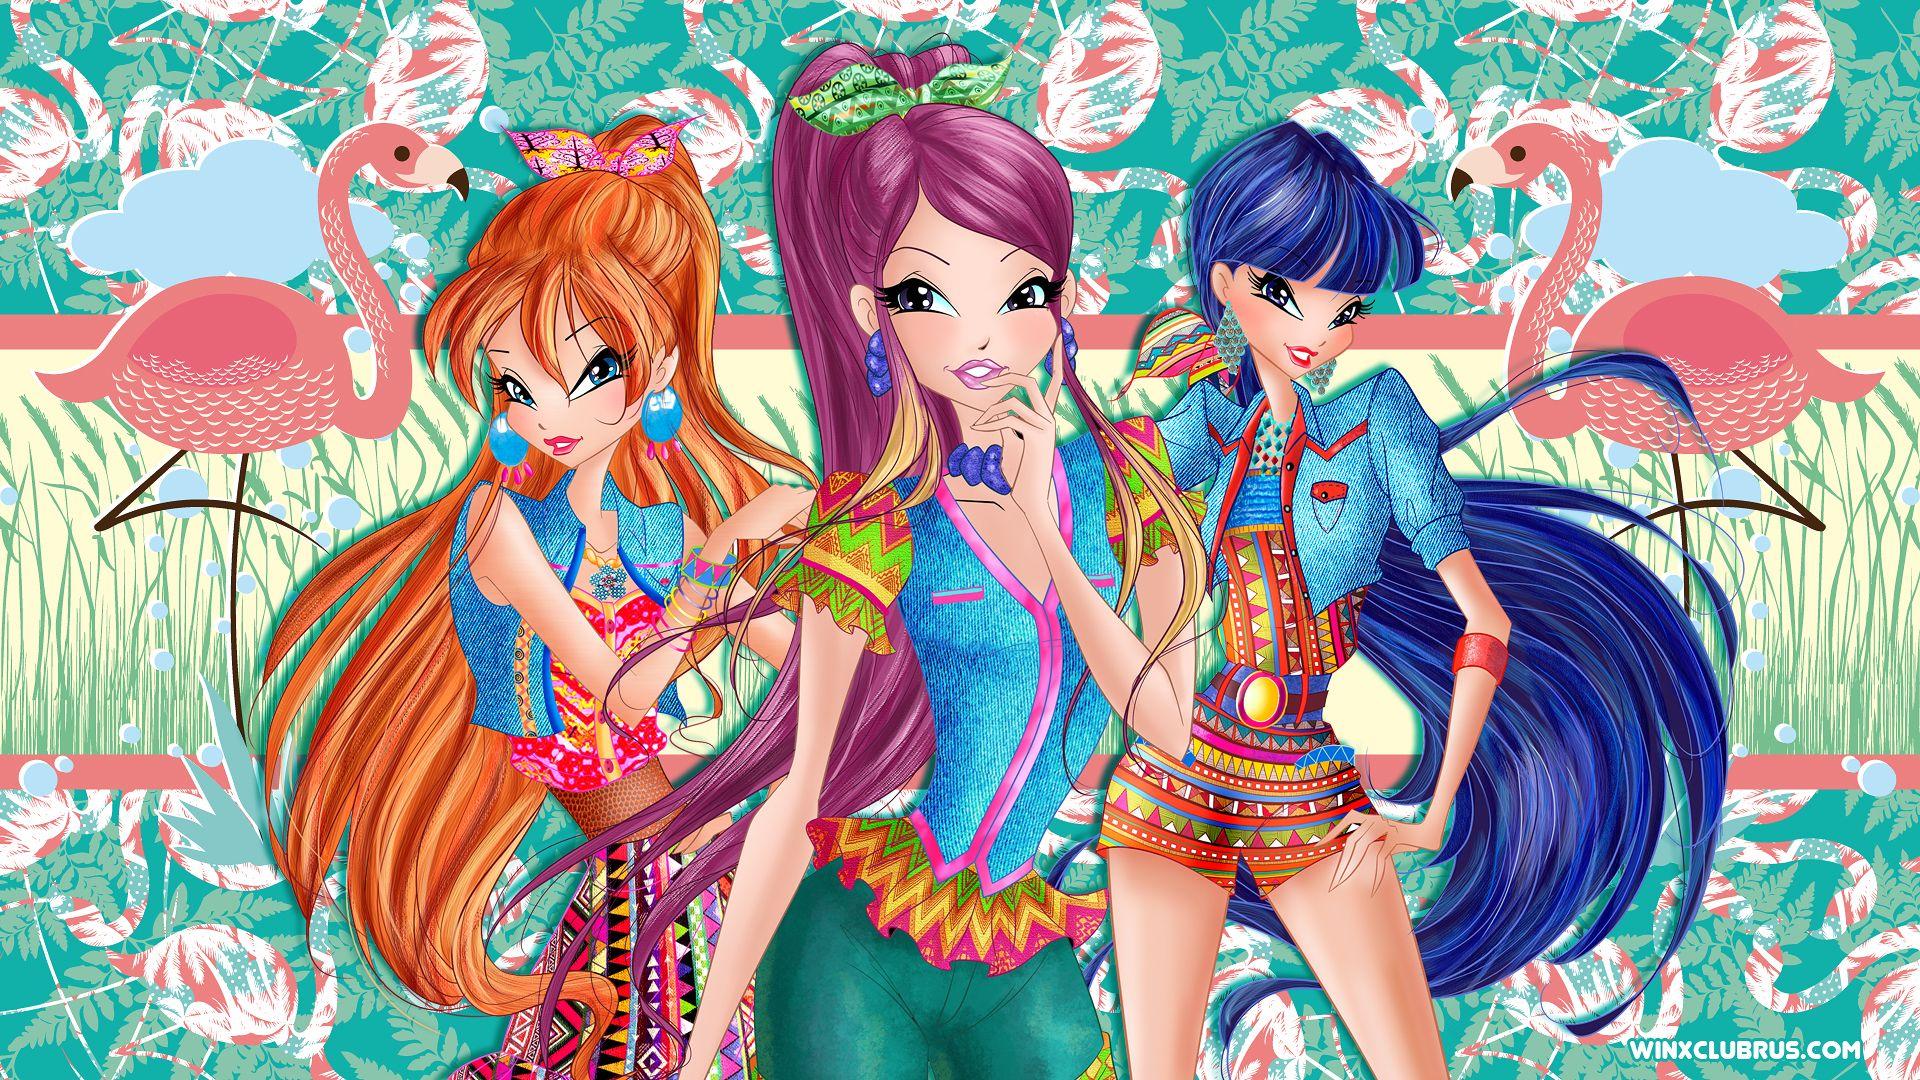 Winx Club in World of Winx and couture style wallpaper